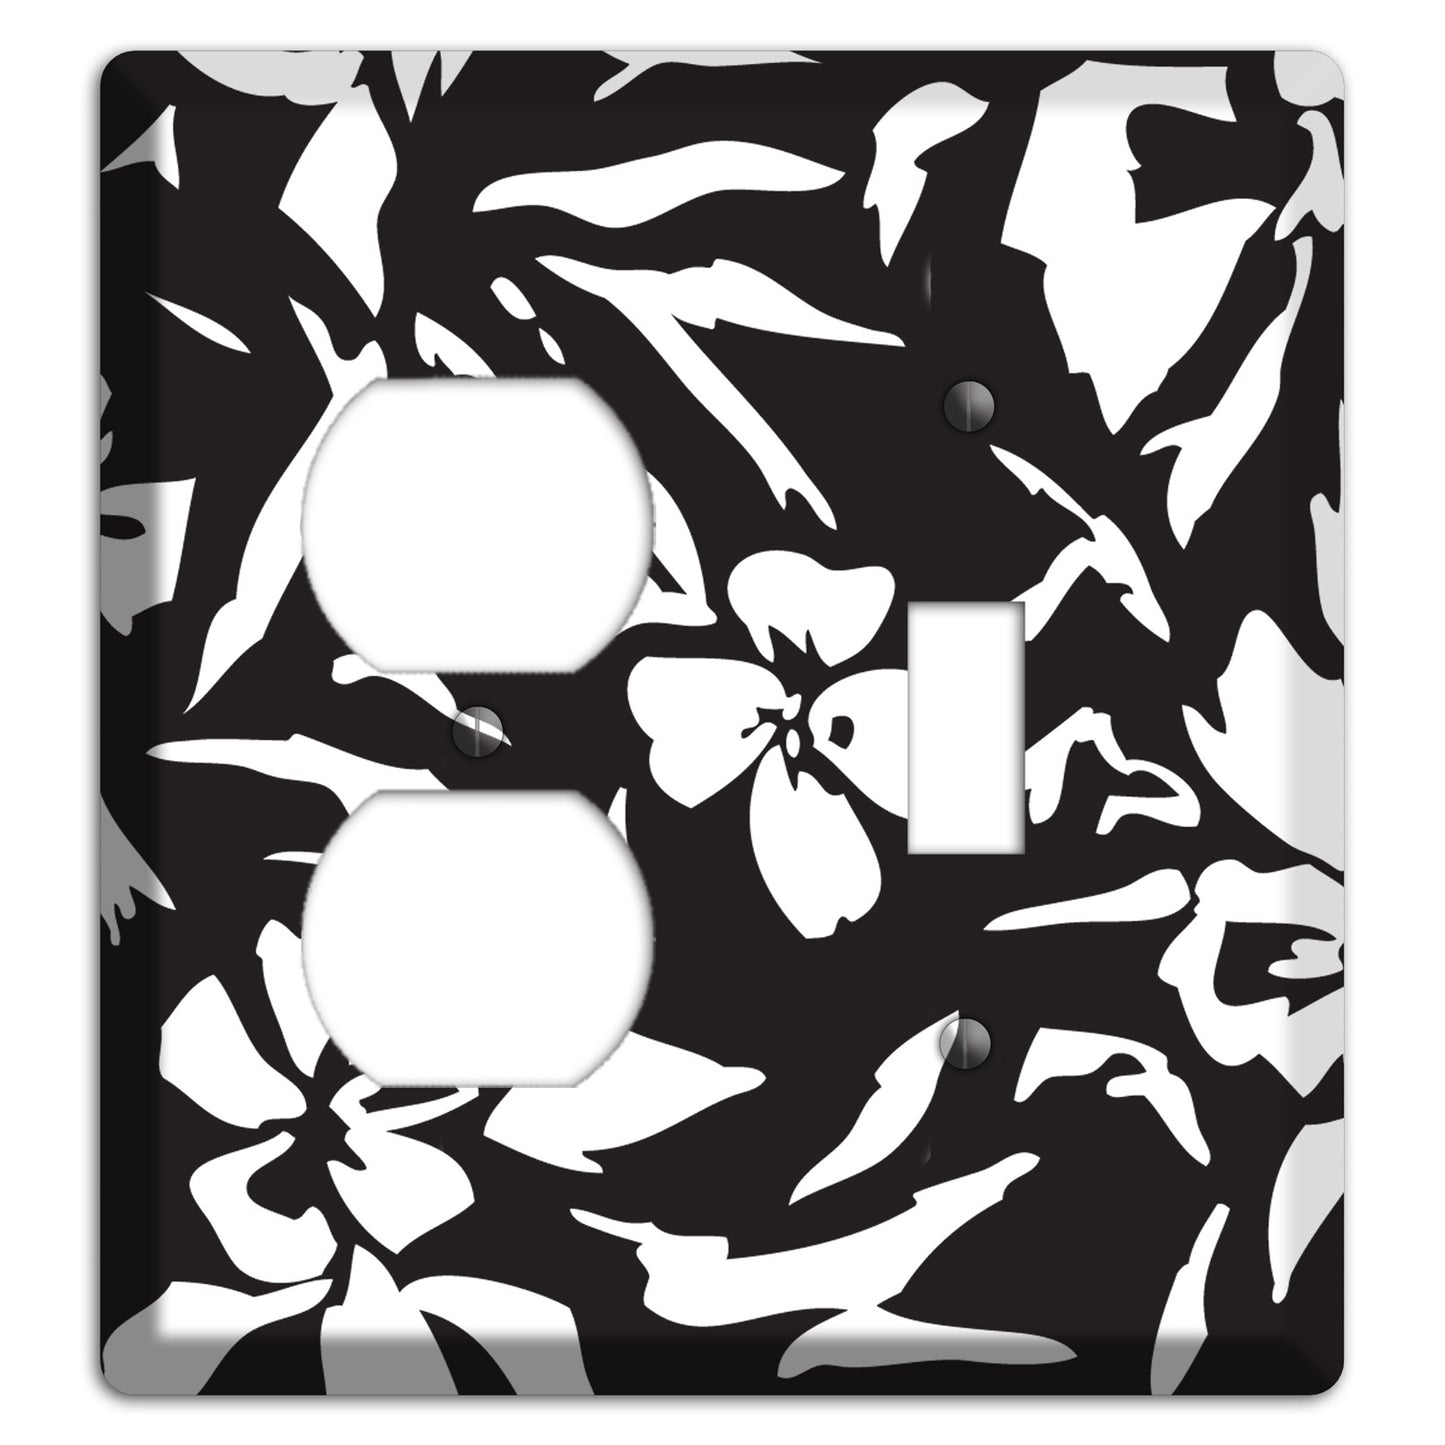 Black with White Woodcut Floral Duplex / Toggle Wallplate